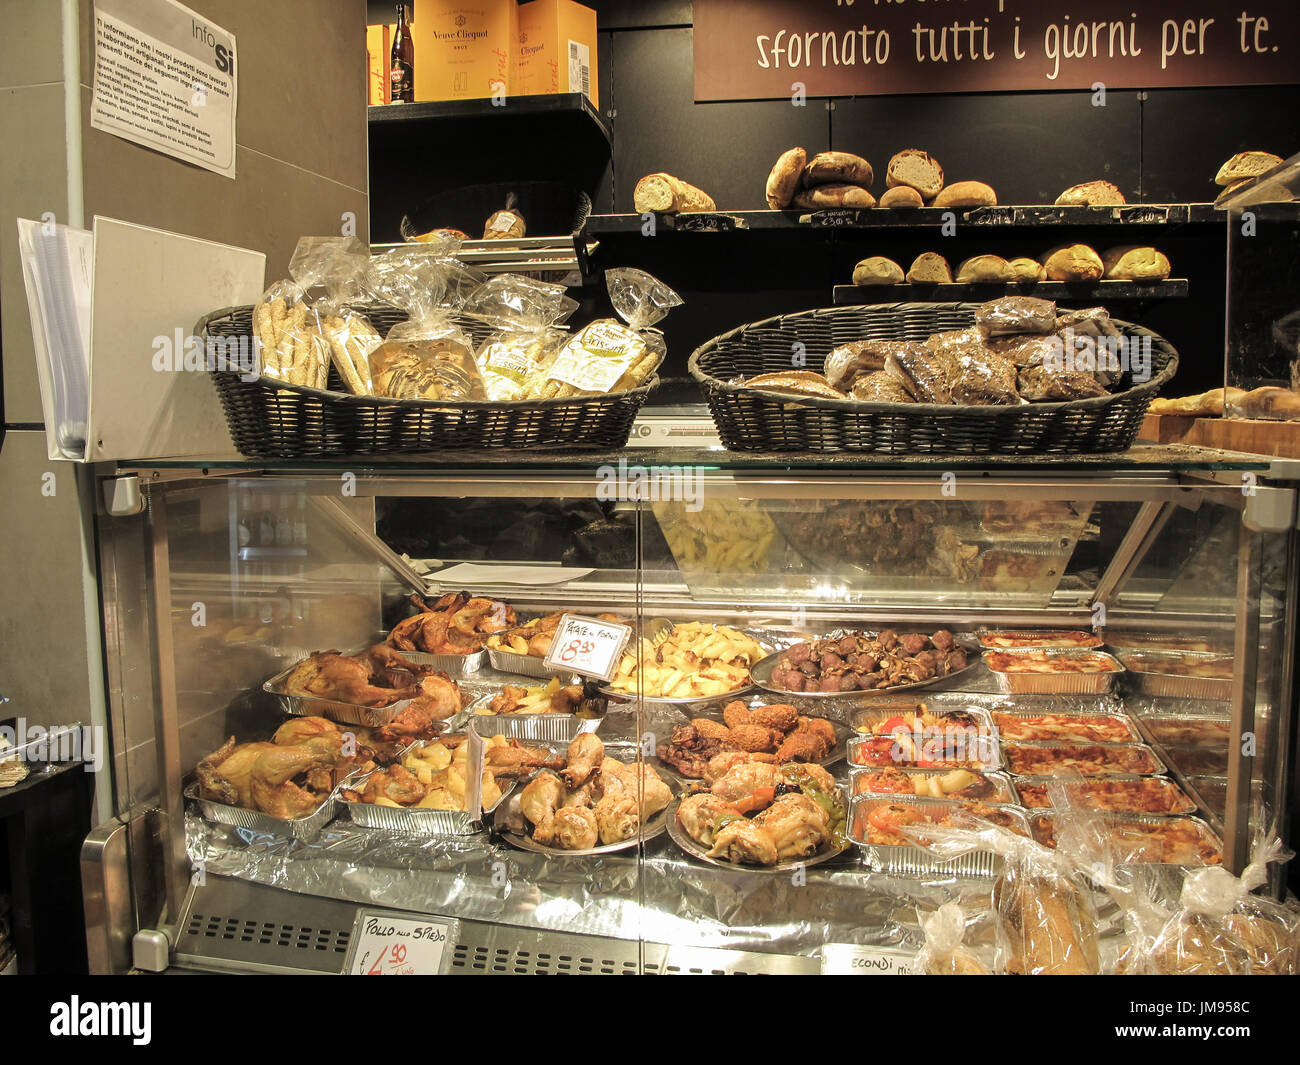 A display of  bread counter with large fresh bakery products into a supermarket in Italy. Rome Stock Photo